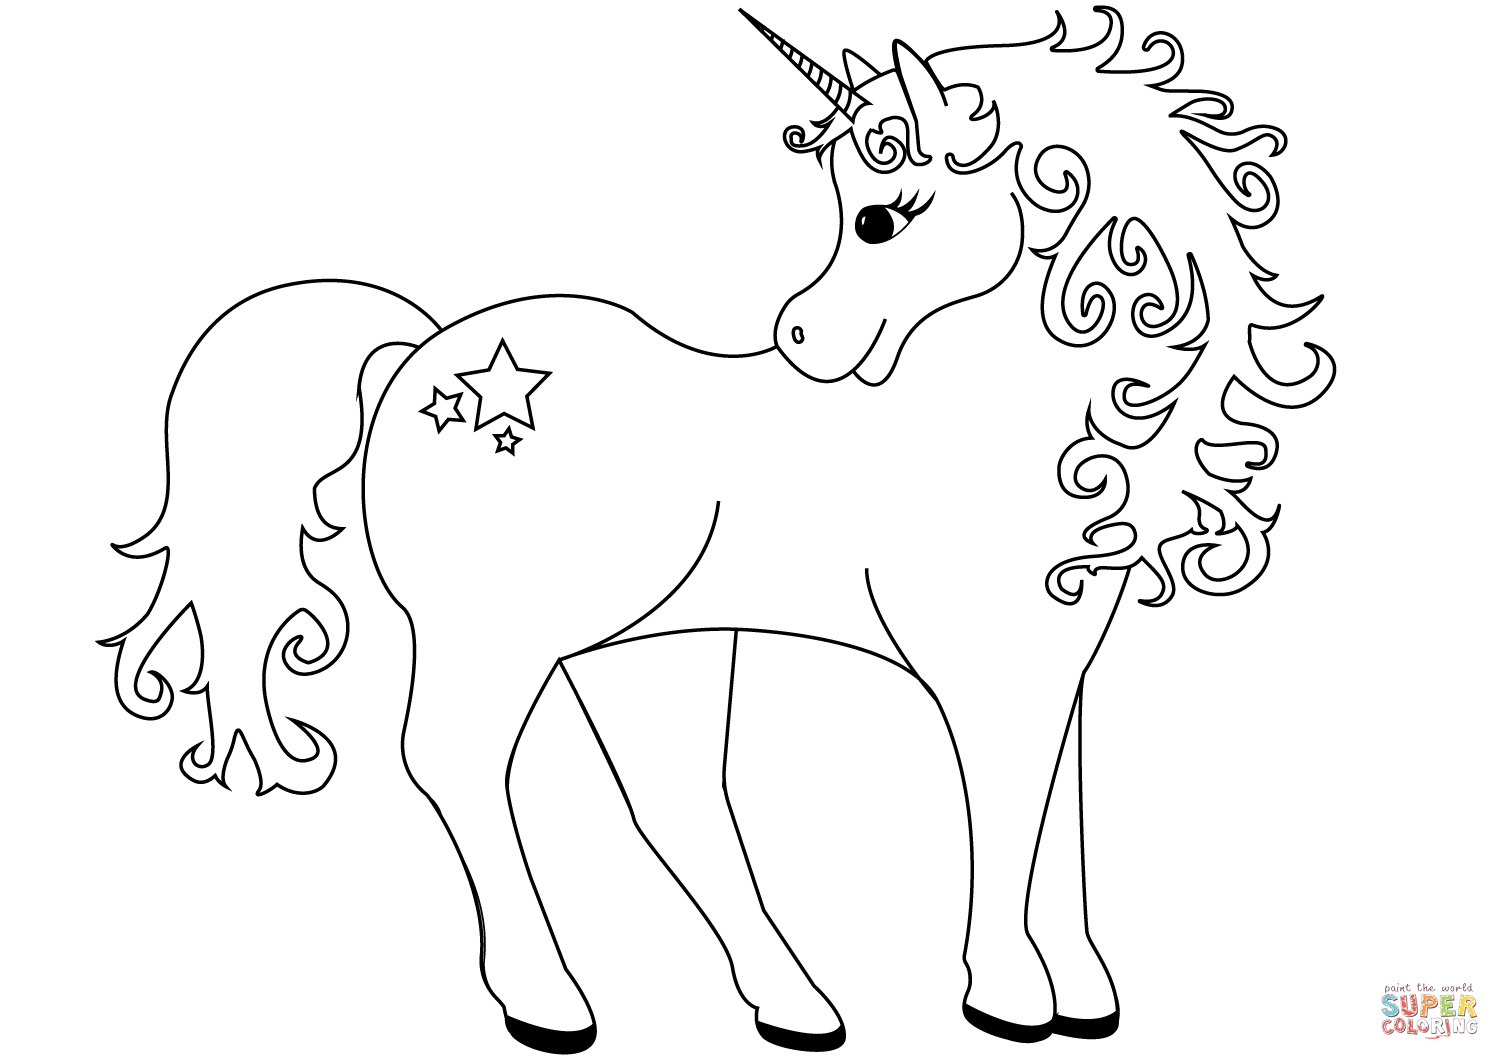 Printable Unicorn Coloring Pages
 Lovely Unicorn coloring page